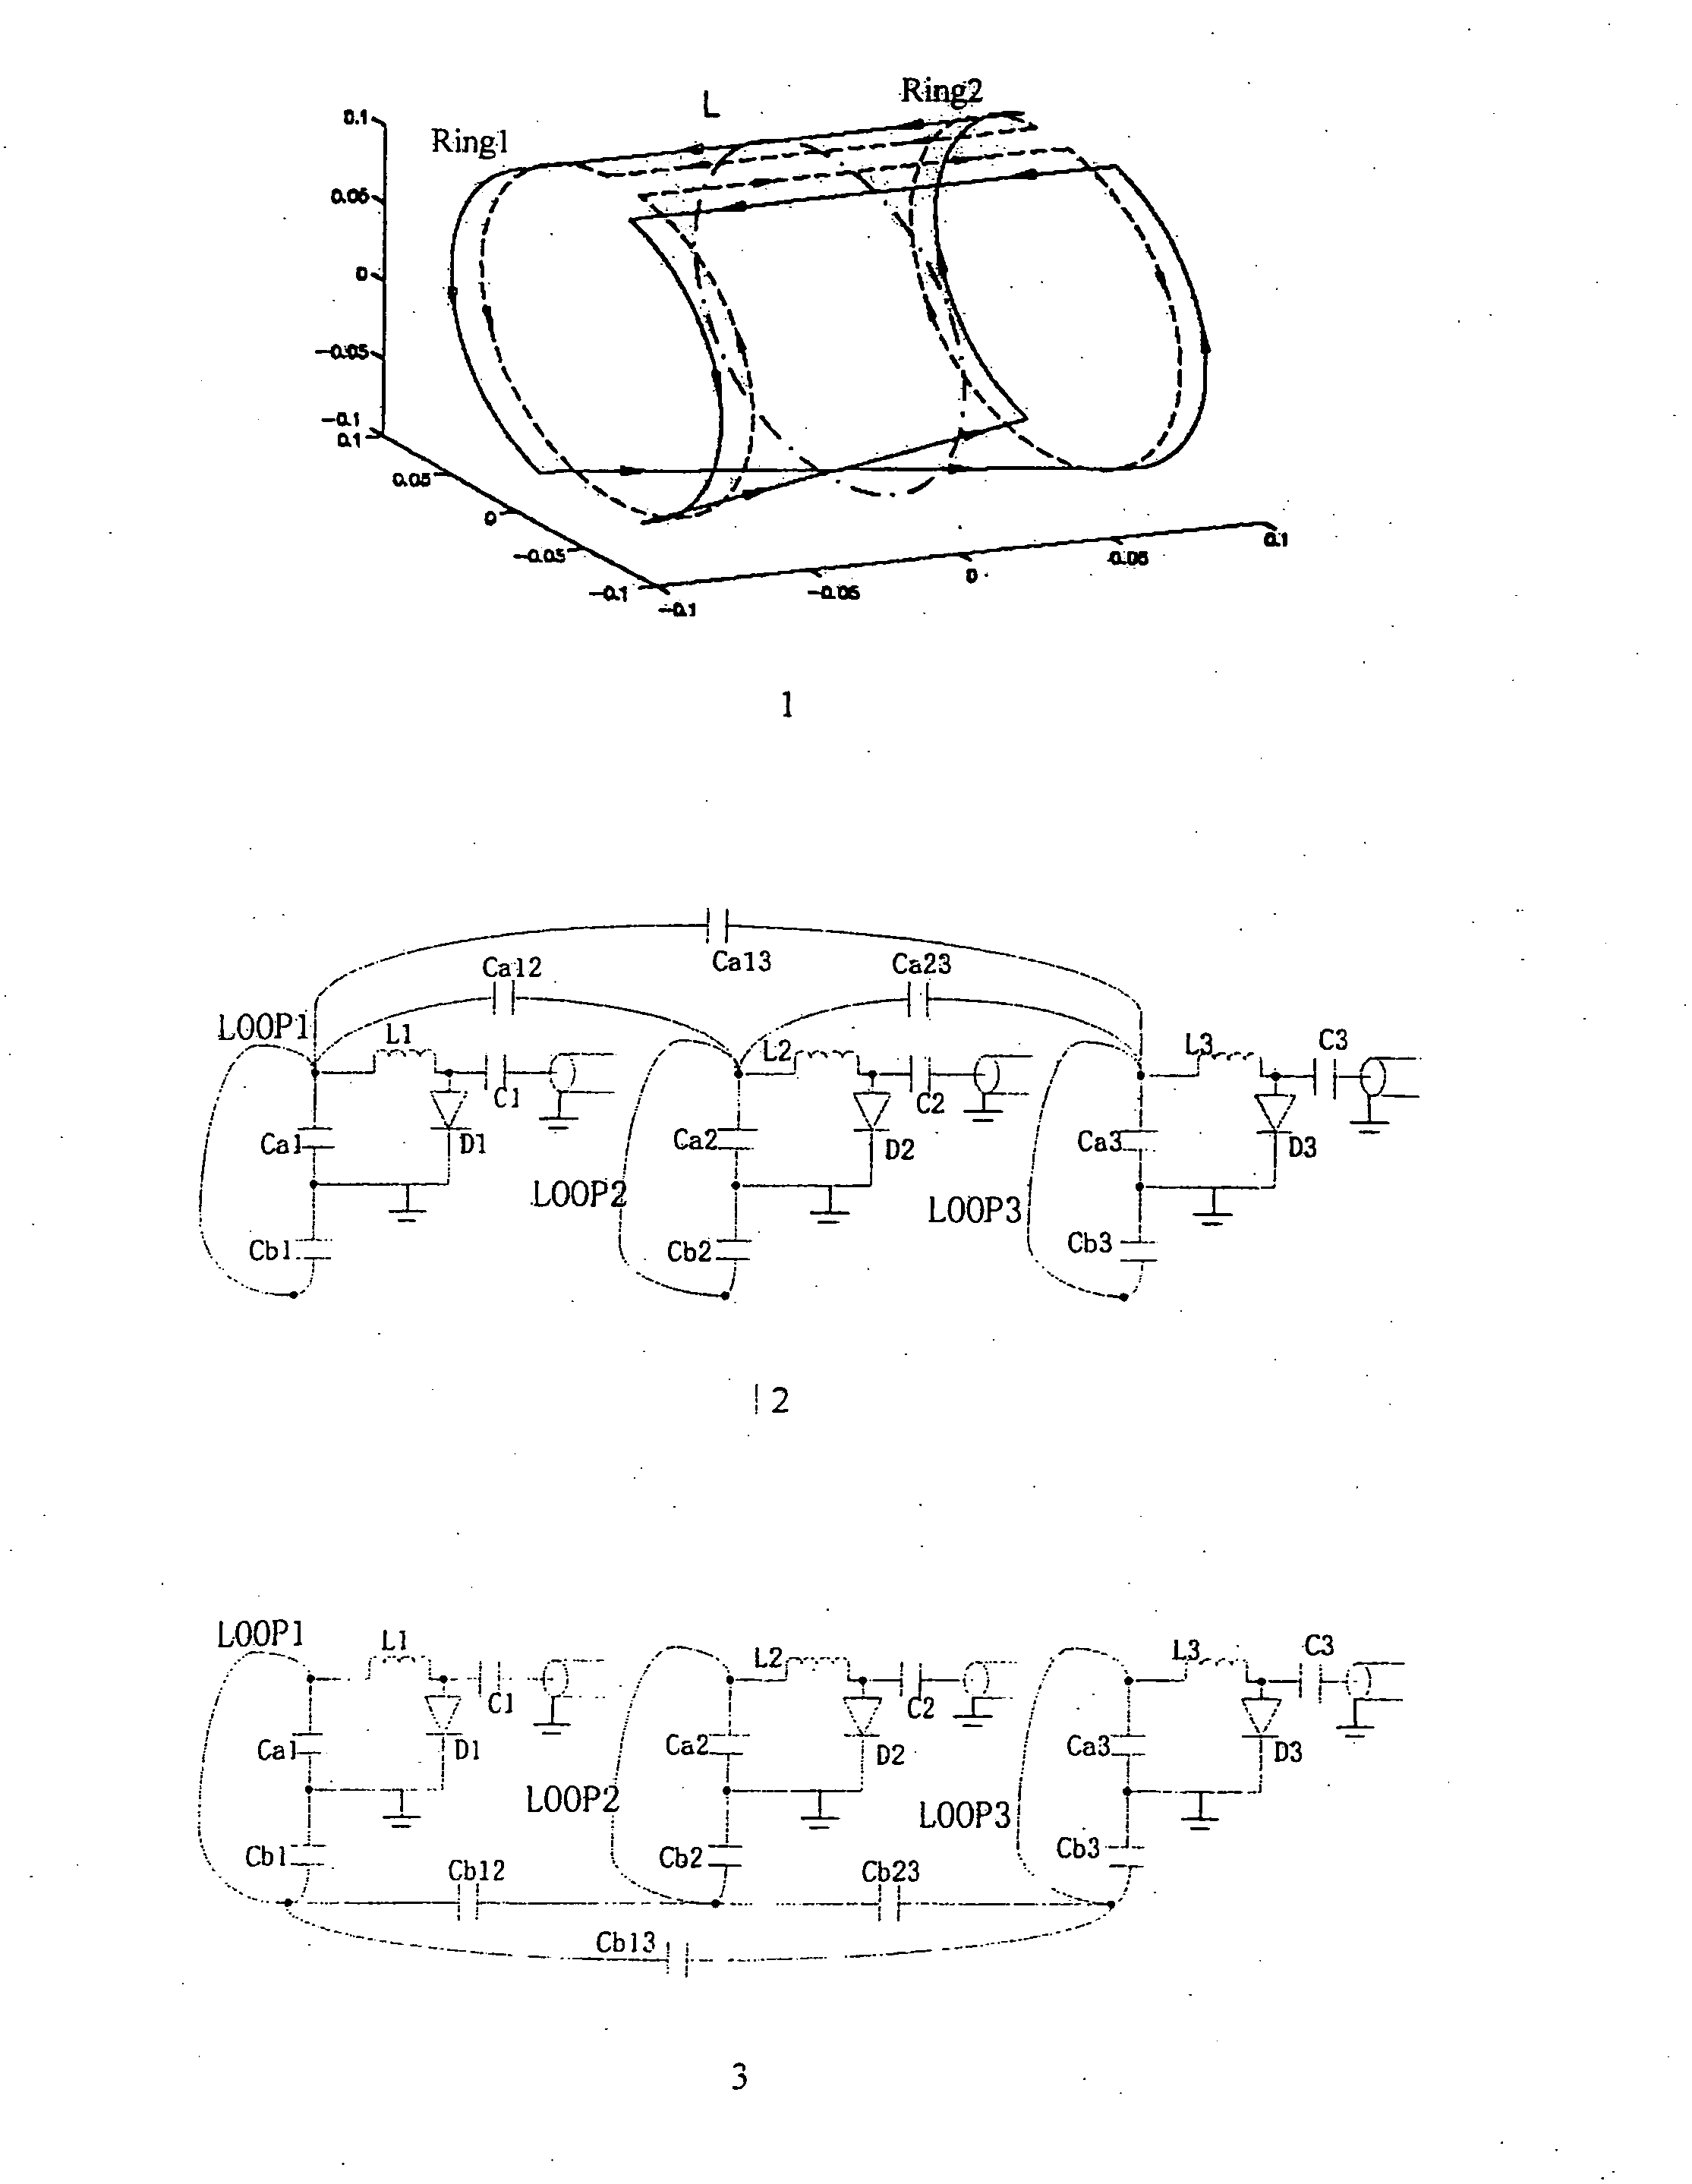 Receiver coil array for a magnetic resonance imaging system